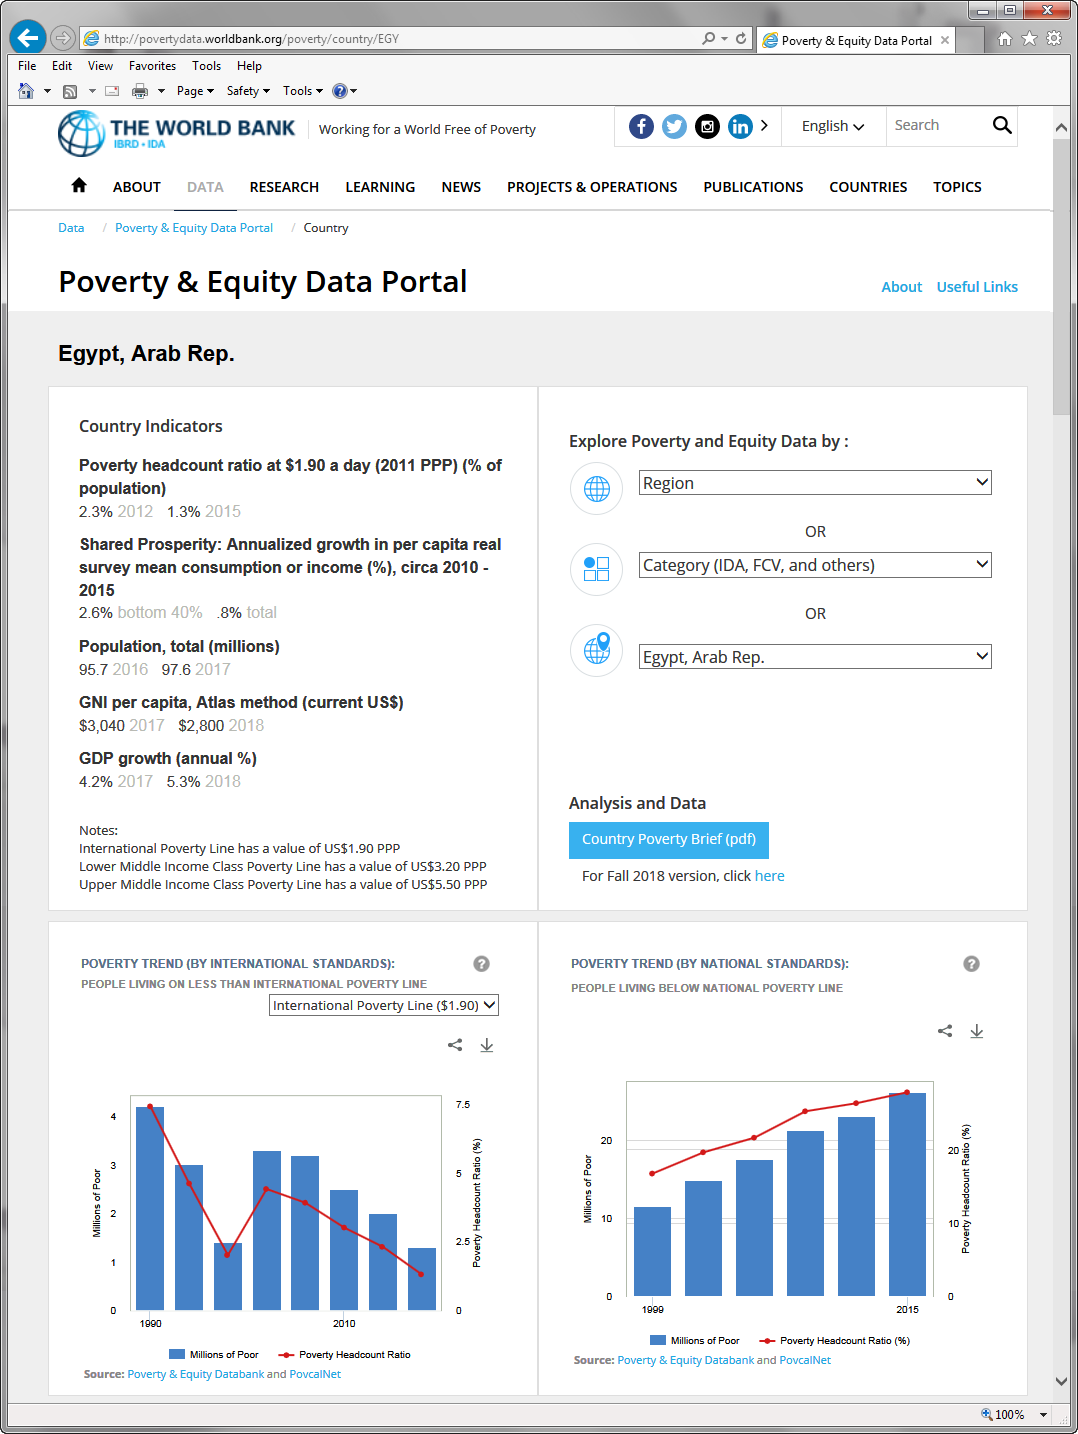 The World Bank - Poverty and Equity Data, Egypt, Fall 2018.